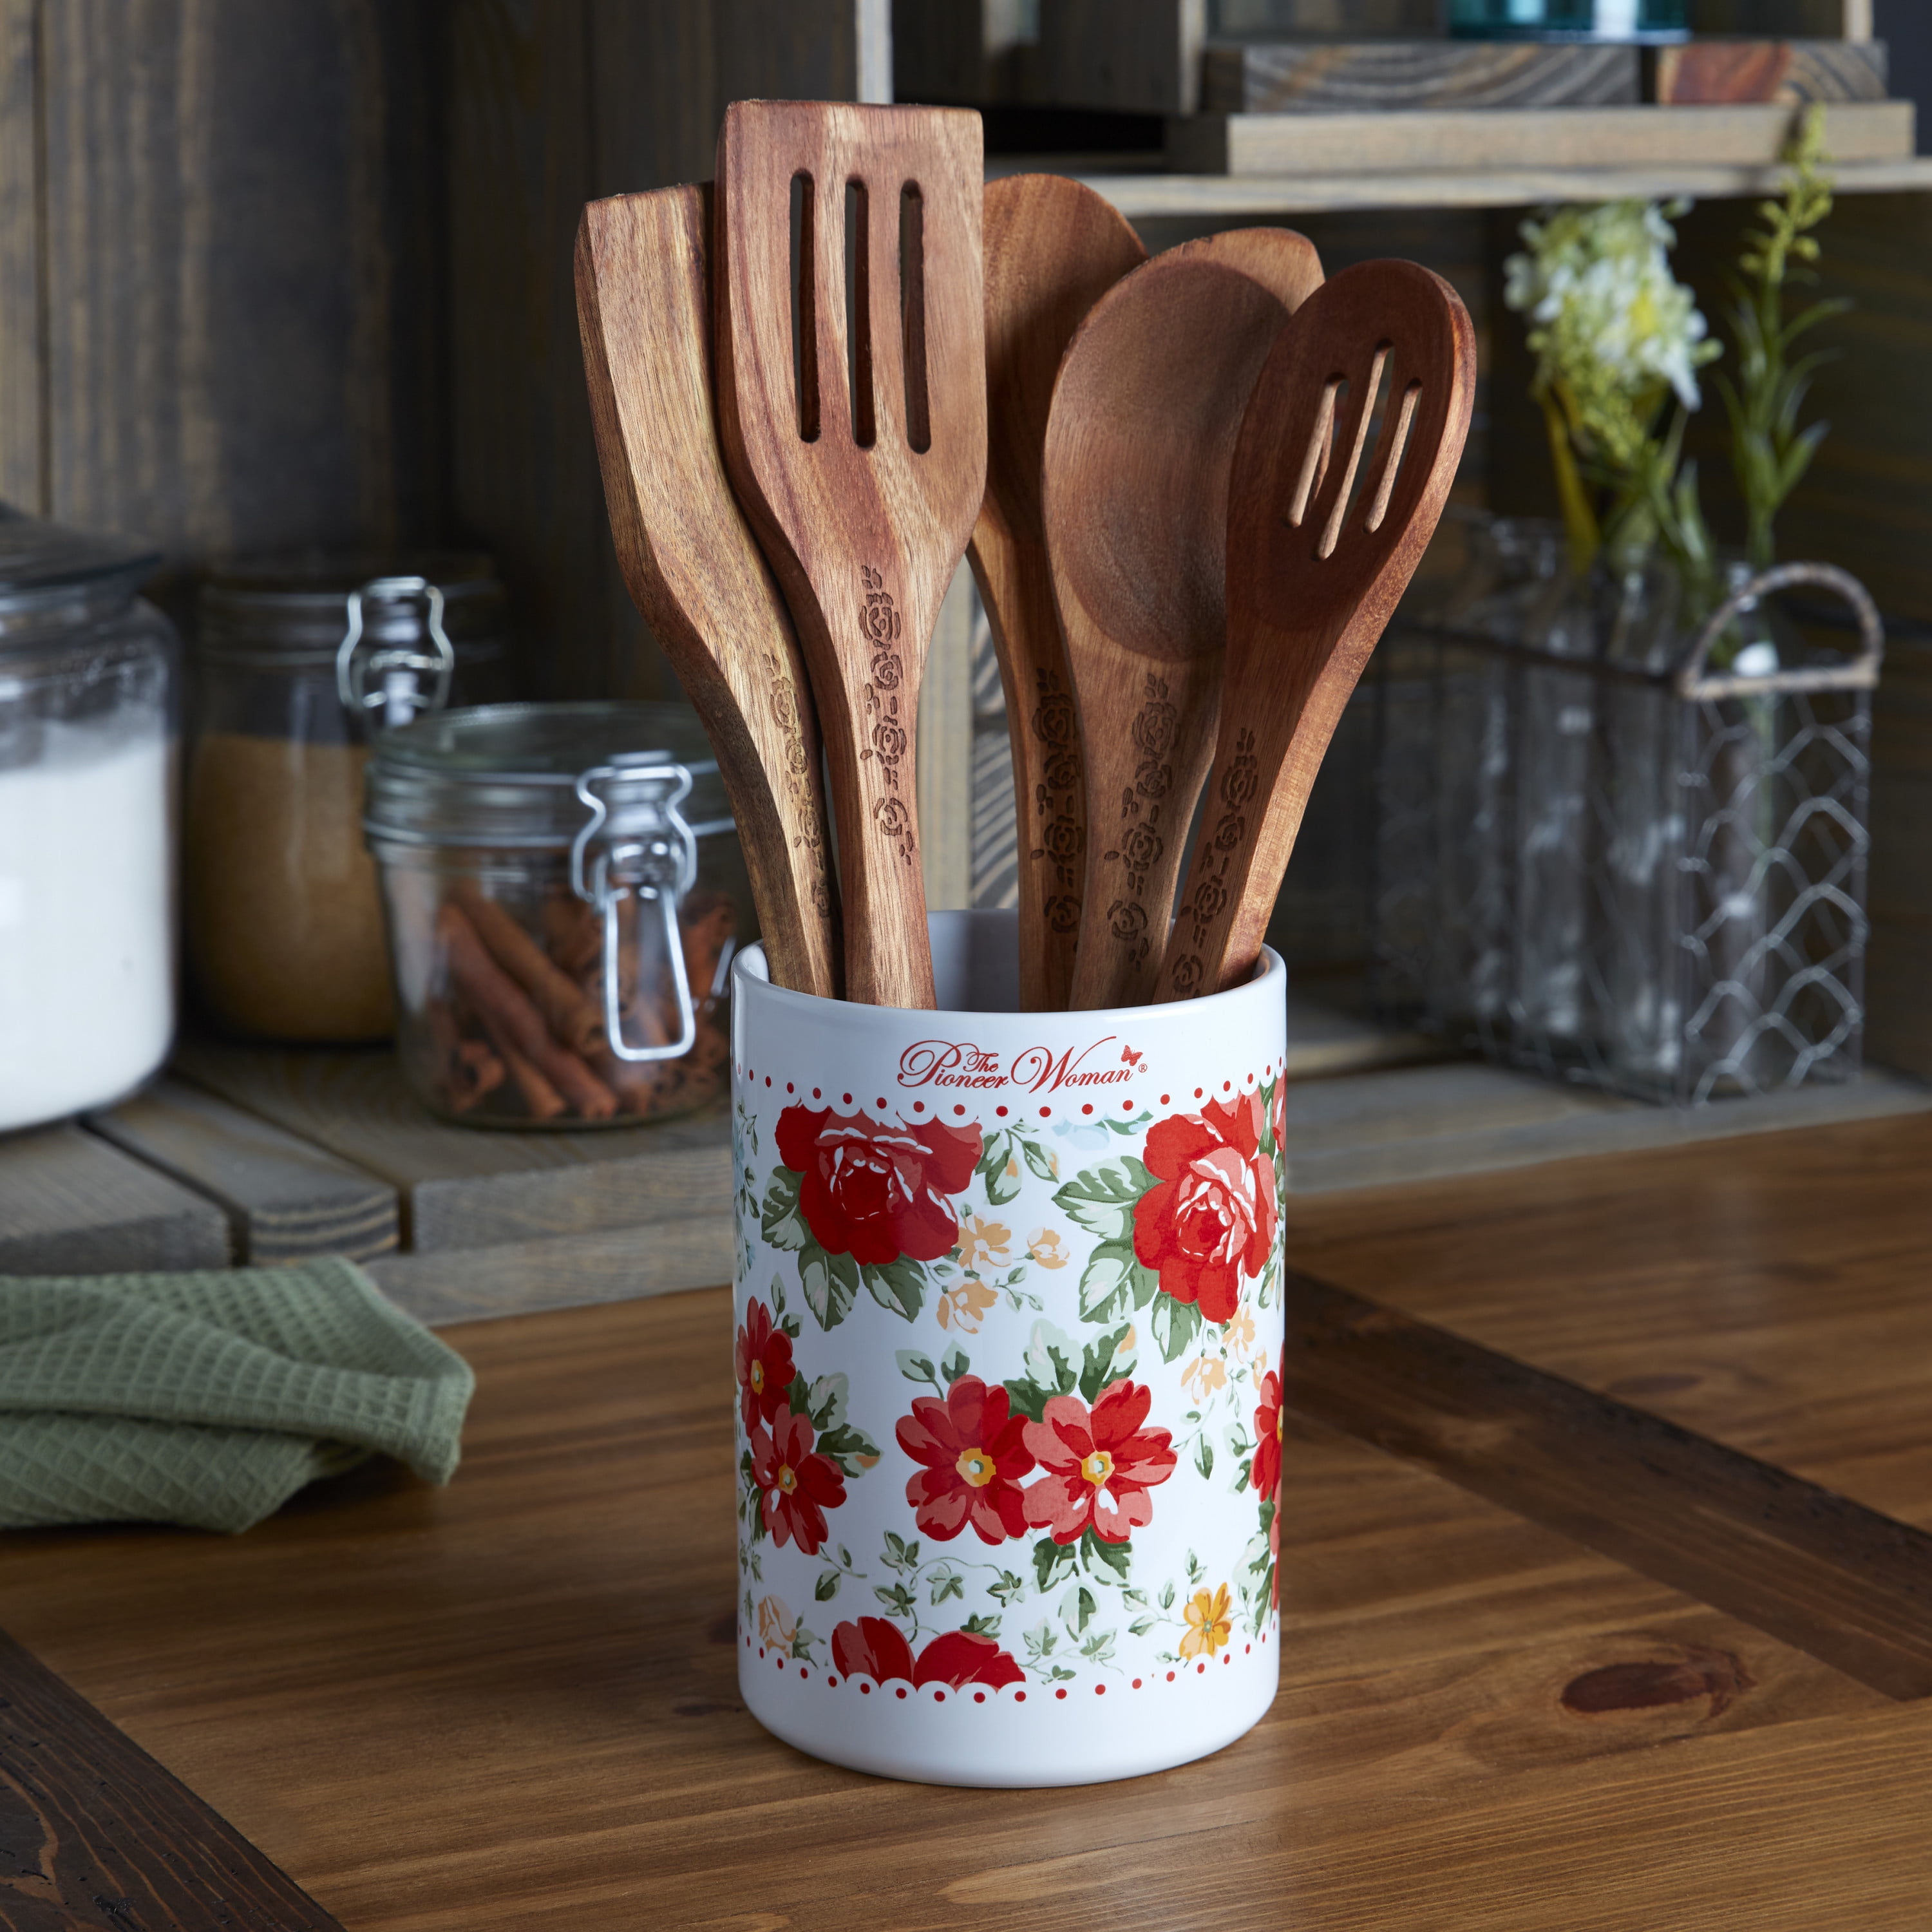 The Pioneer Woman 6-piece Crock and Wooden Tool Set in Vintage Floral 